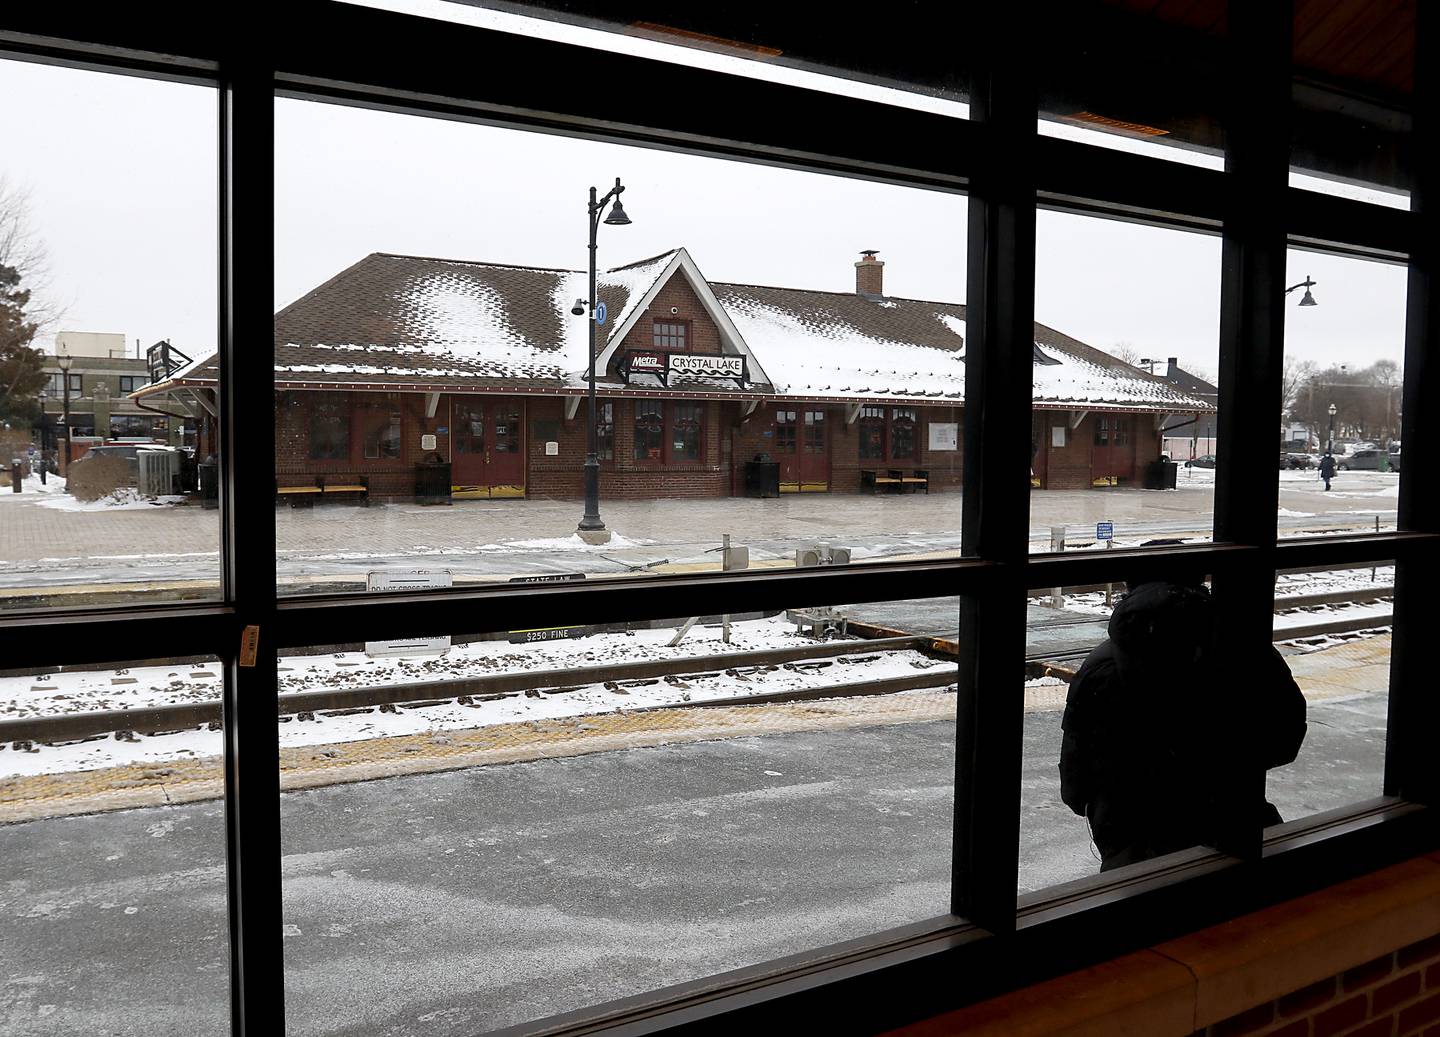 A woman waits for a train Thursday, Feb, 3, 2022, at the Metra station in downtown Crystal Lake. Crystal Lake and Cary are in the considering purchases their downtown stations after Union Pacific decided to sell this station and other commuter stations.